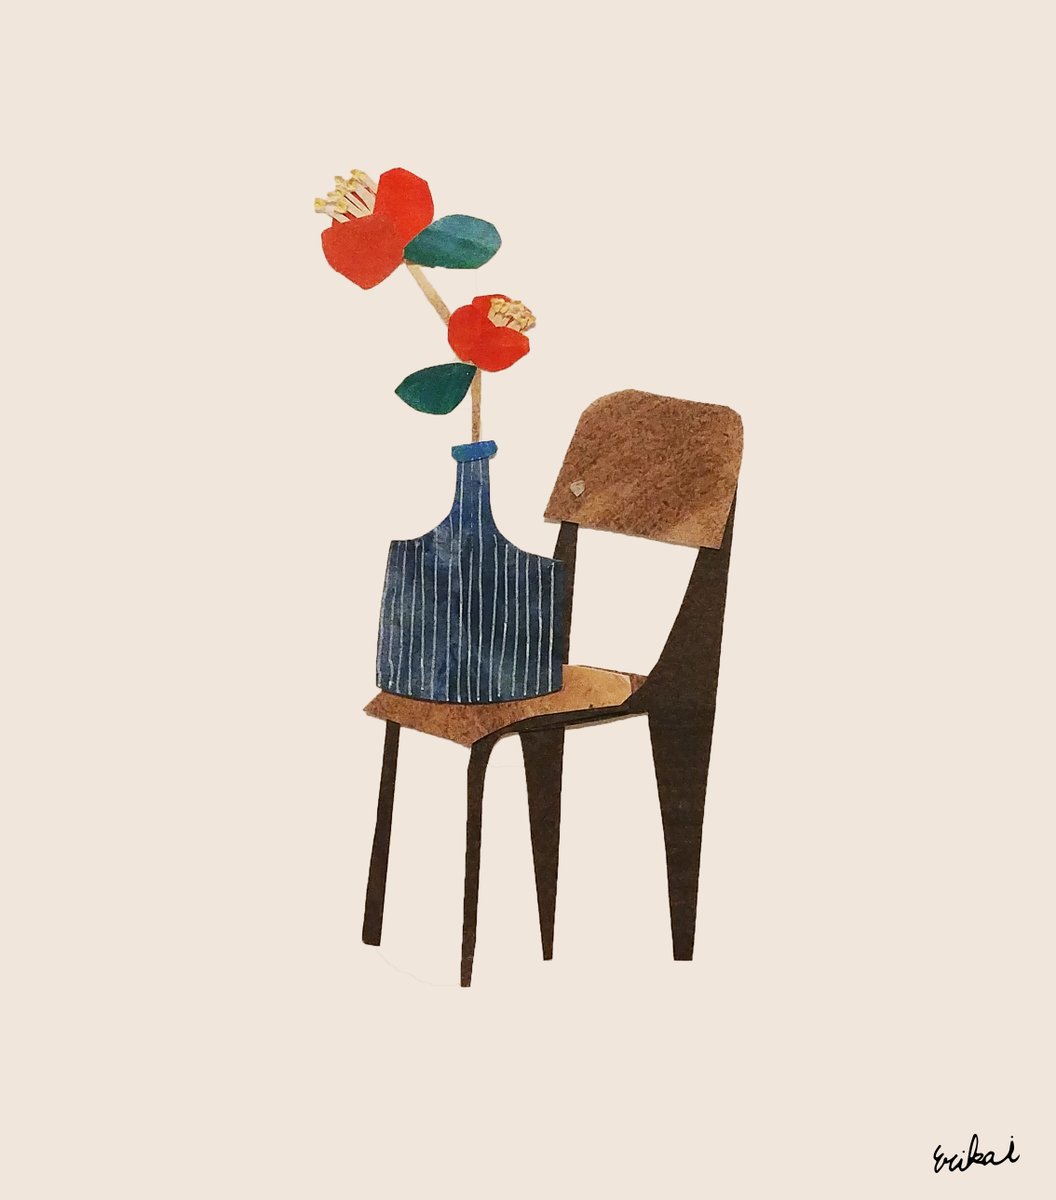 Erikaintheisland Cutpaperartist A Twitteren Today S Chair Is Standard Chair 今日の椅子と花 Standardchair Jeanprouve Interior Chair Furniture Illustrator Illustration イラストレーター 家具 インテリア デザイン スタンダードチェア 切り絵